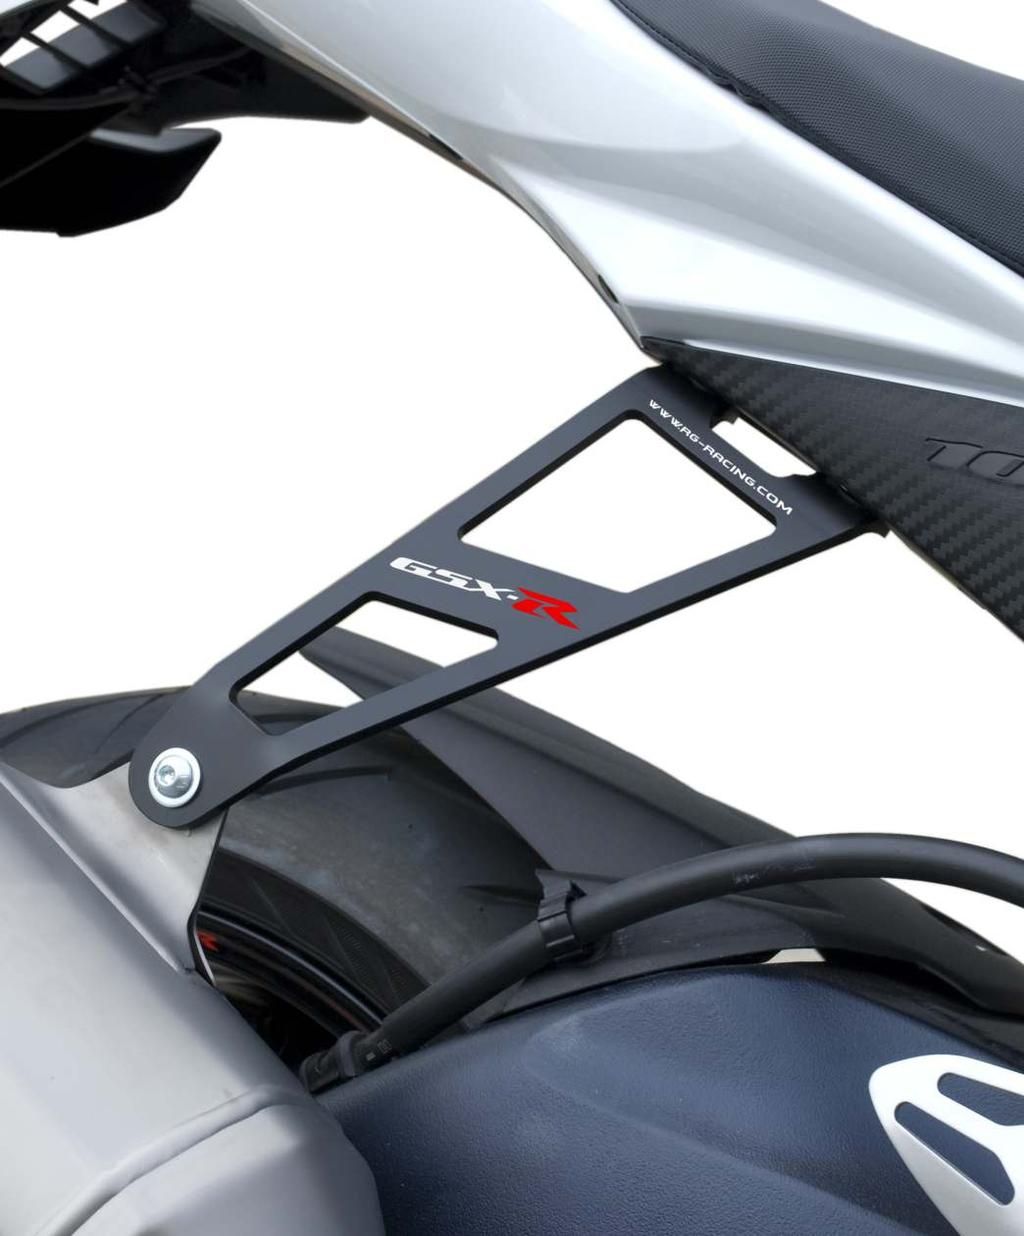 EXHAUST HANGERS EXHAUST HANGERS EXHAUST HANGERS Exhaust Hangers allow riders who don t need to carry a passenger the opportunity to remove the redundant and heavy pillion pegs, exchanging them with a